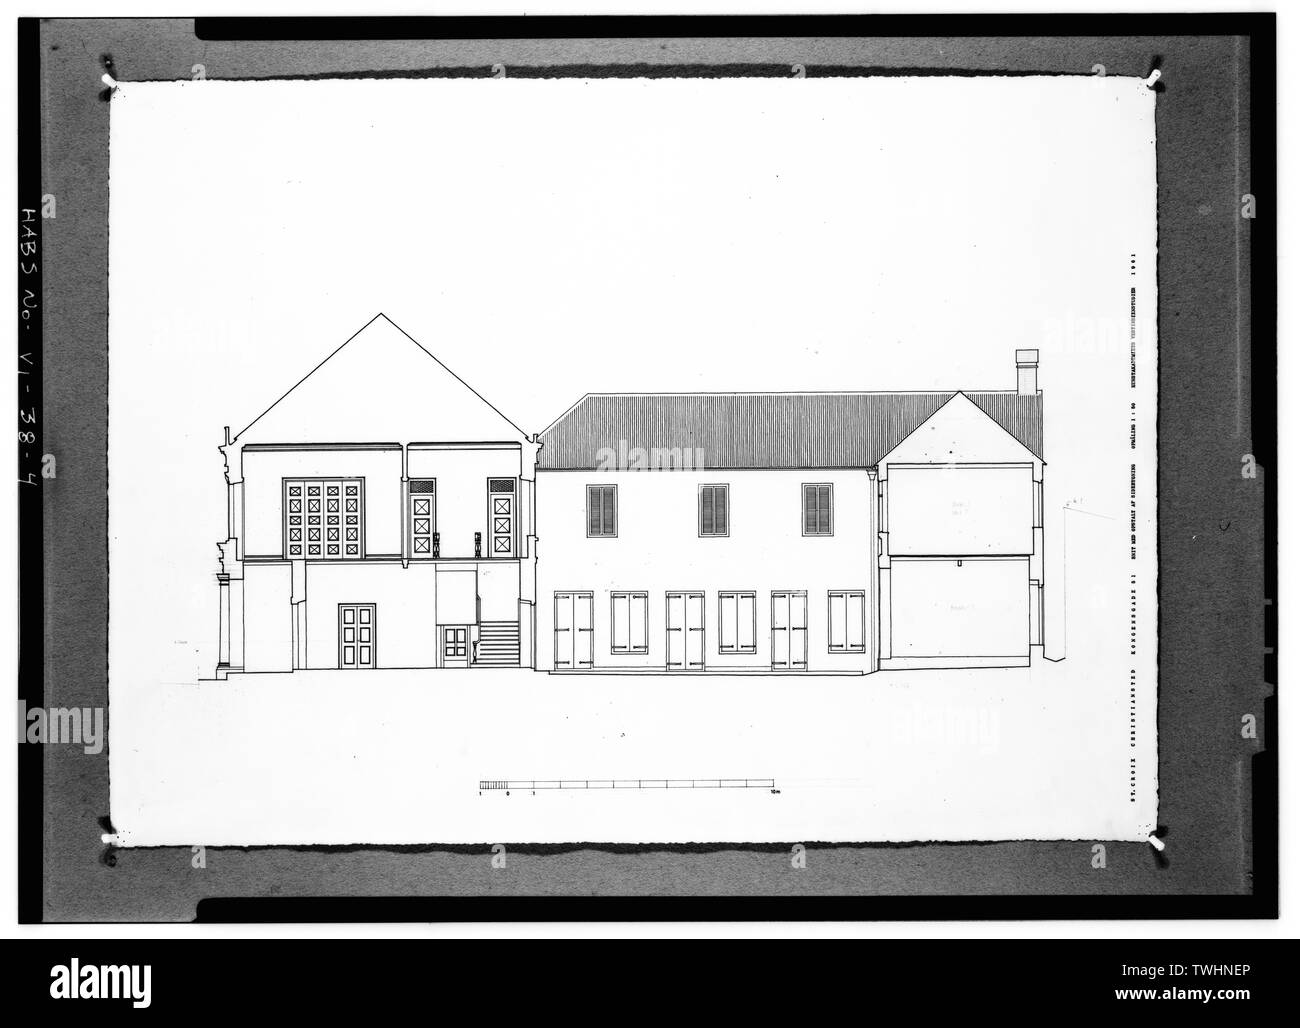 SECTION AND ELEVATION OF SIDE BUILDING - Kompagnigade 51 (House), 51 Company Street, Christiansted, St. Croix, VI Stock Photo